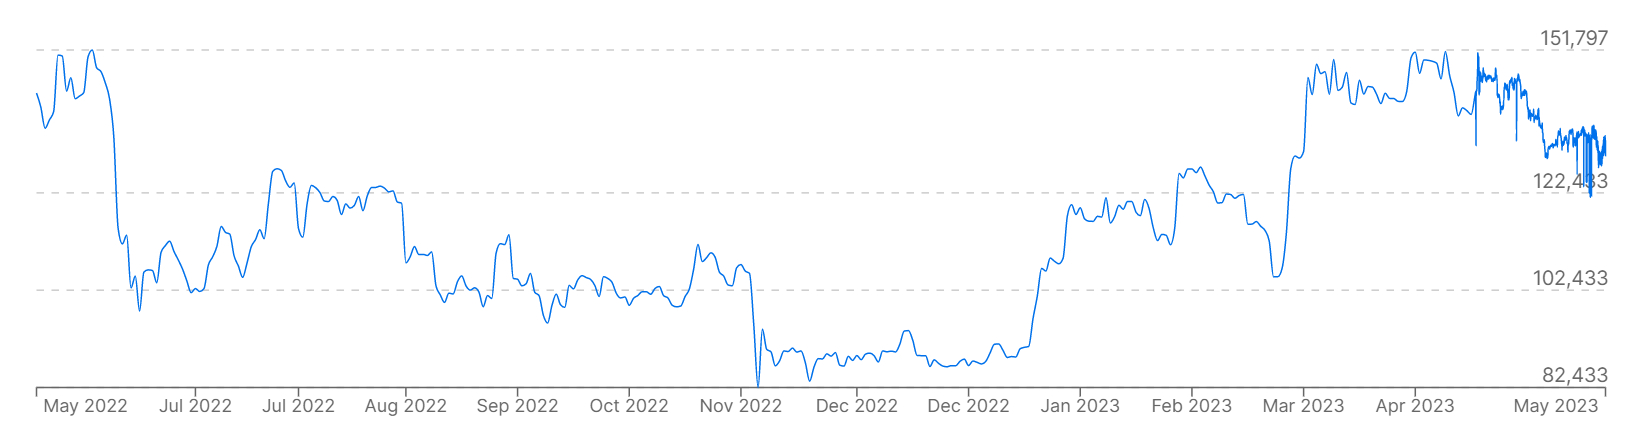 A chart showing Bitcoin prices versus the Brazilian real over the past 12 months.